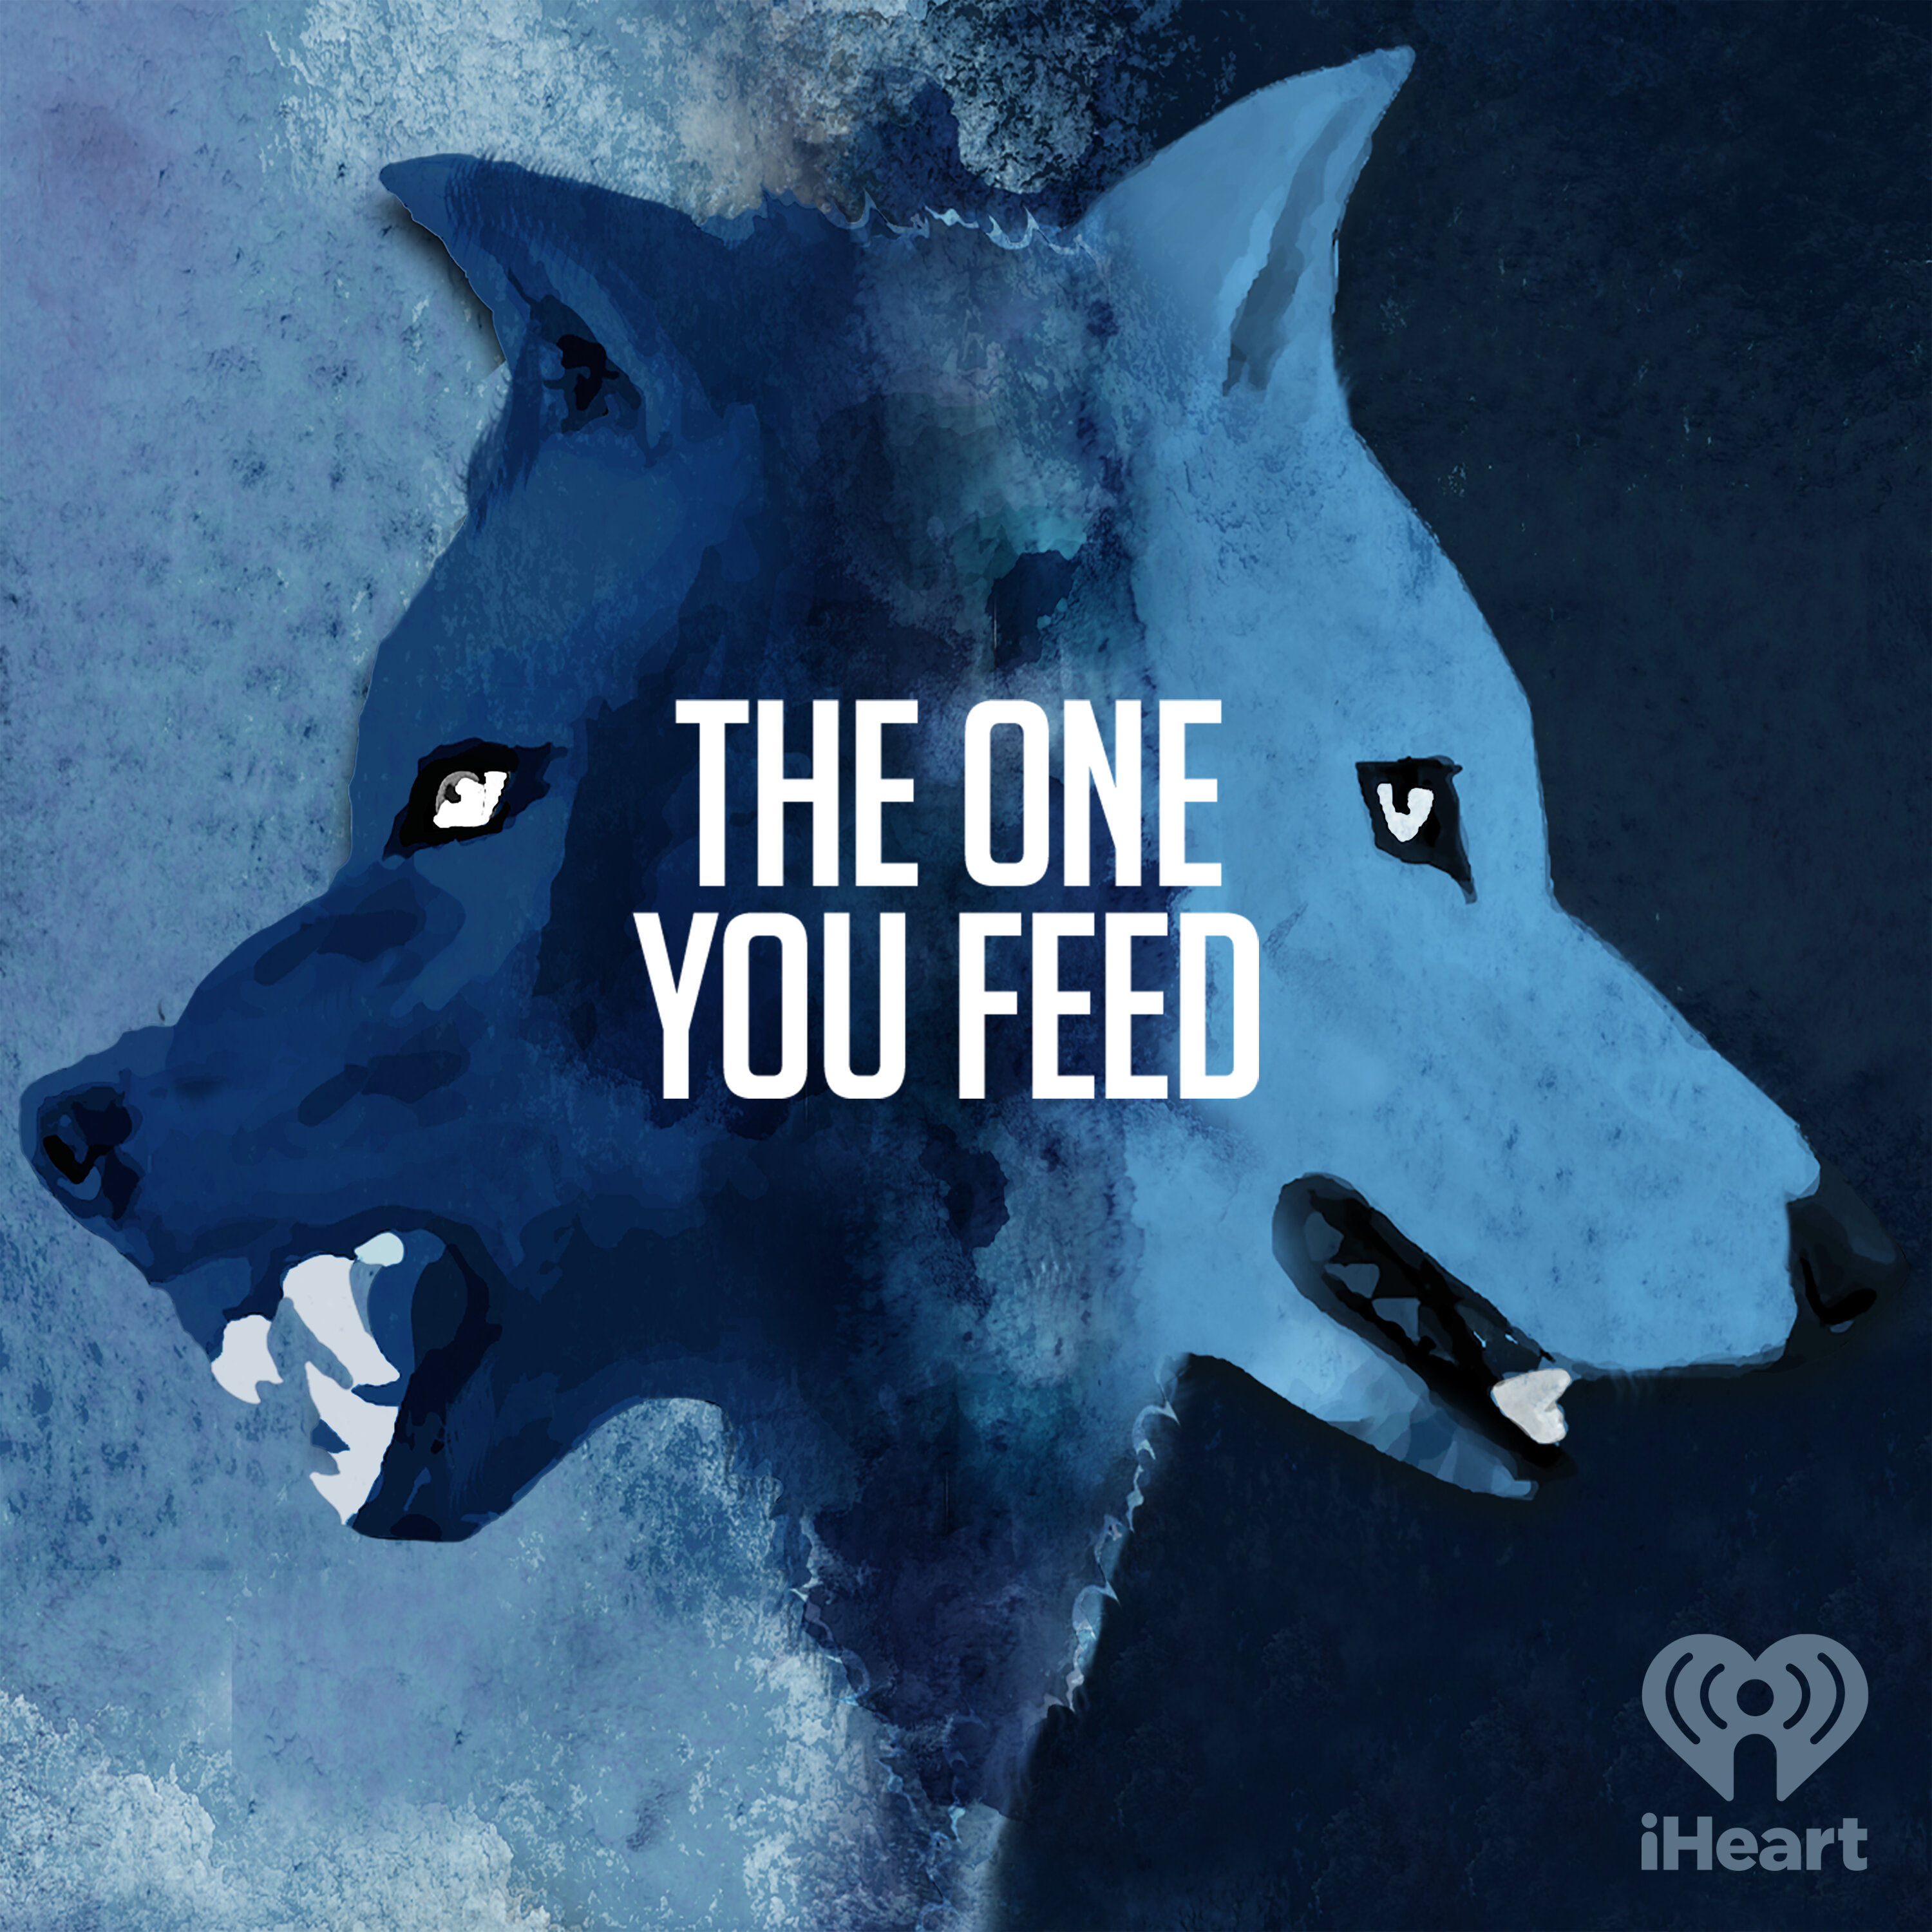 The One You Feed podcast